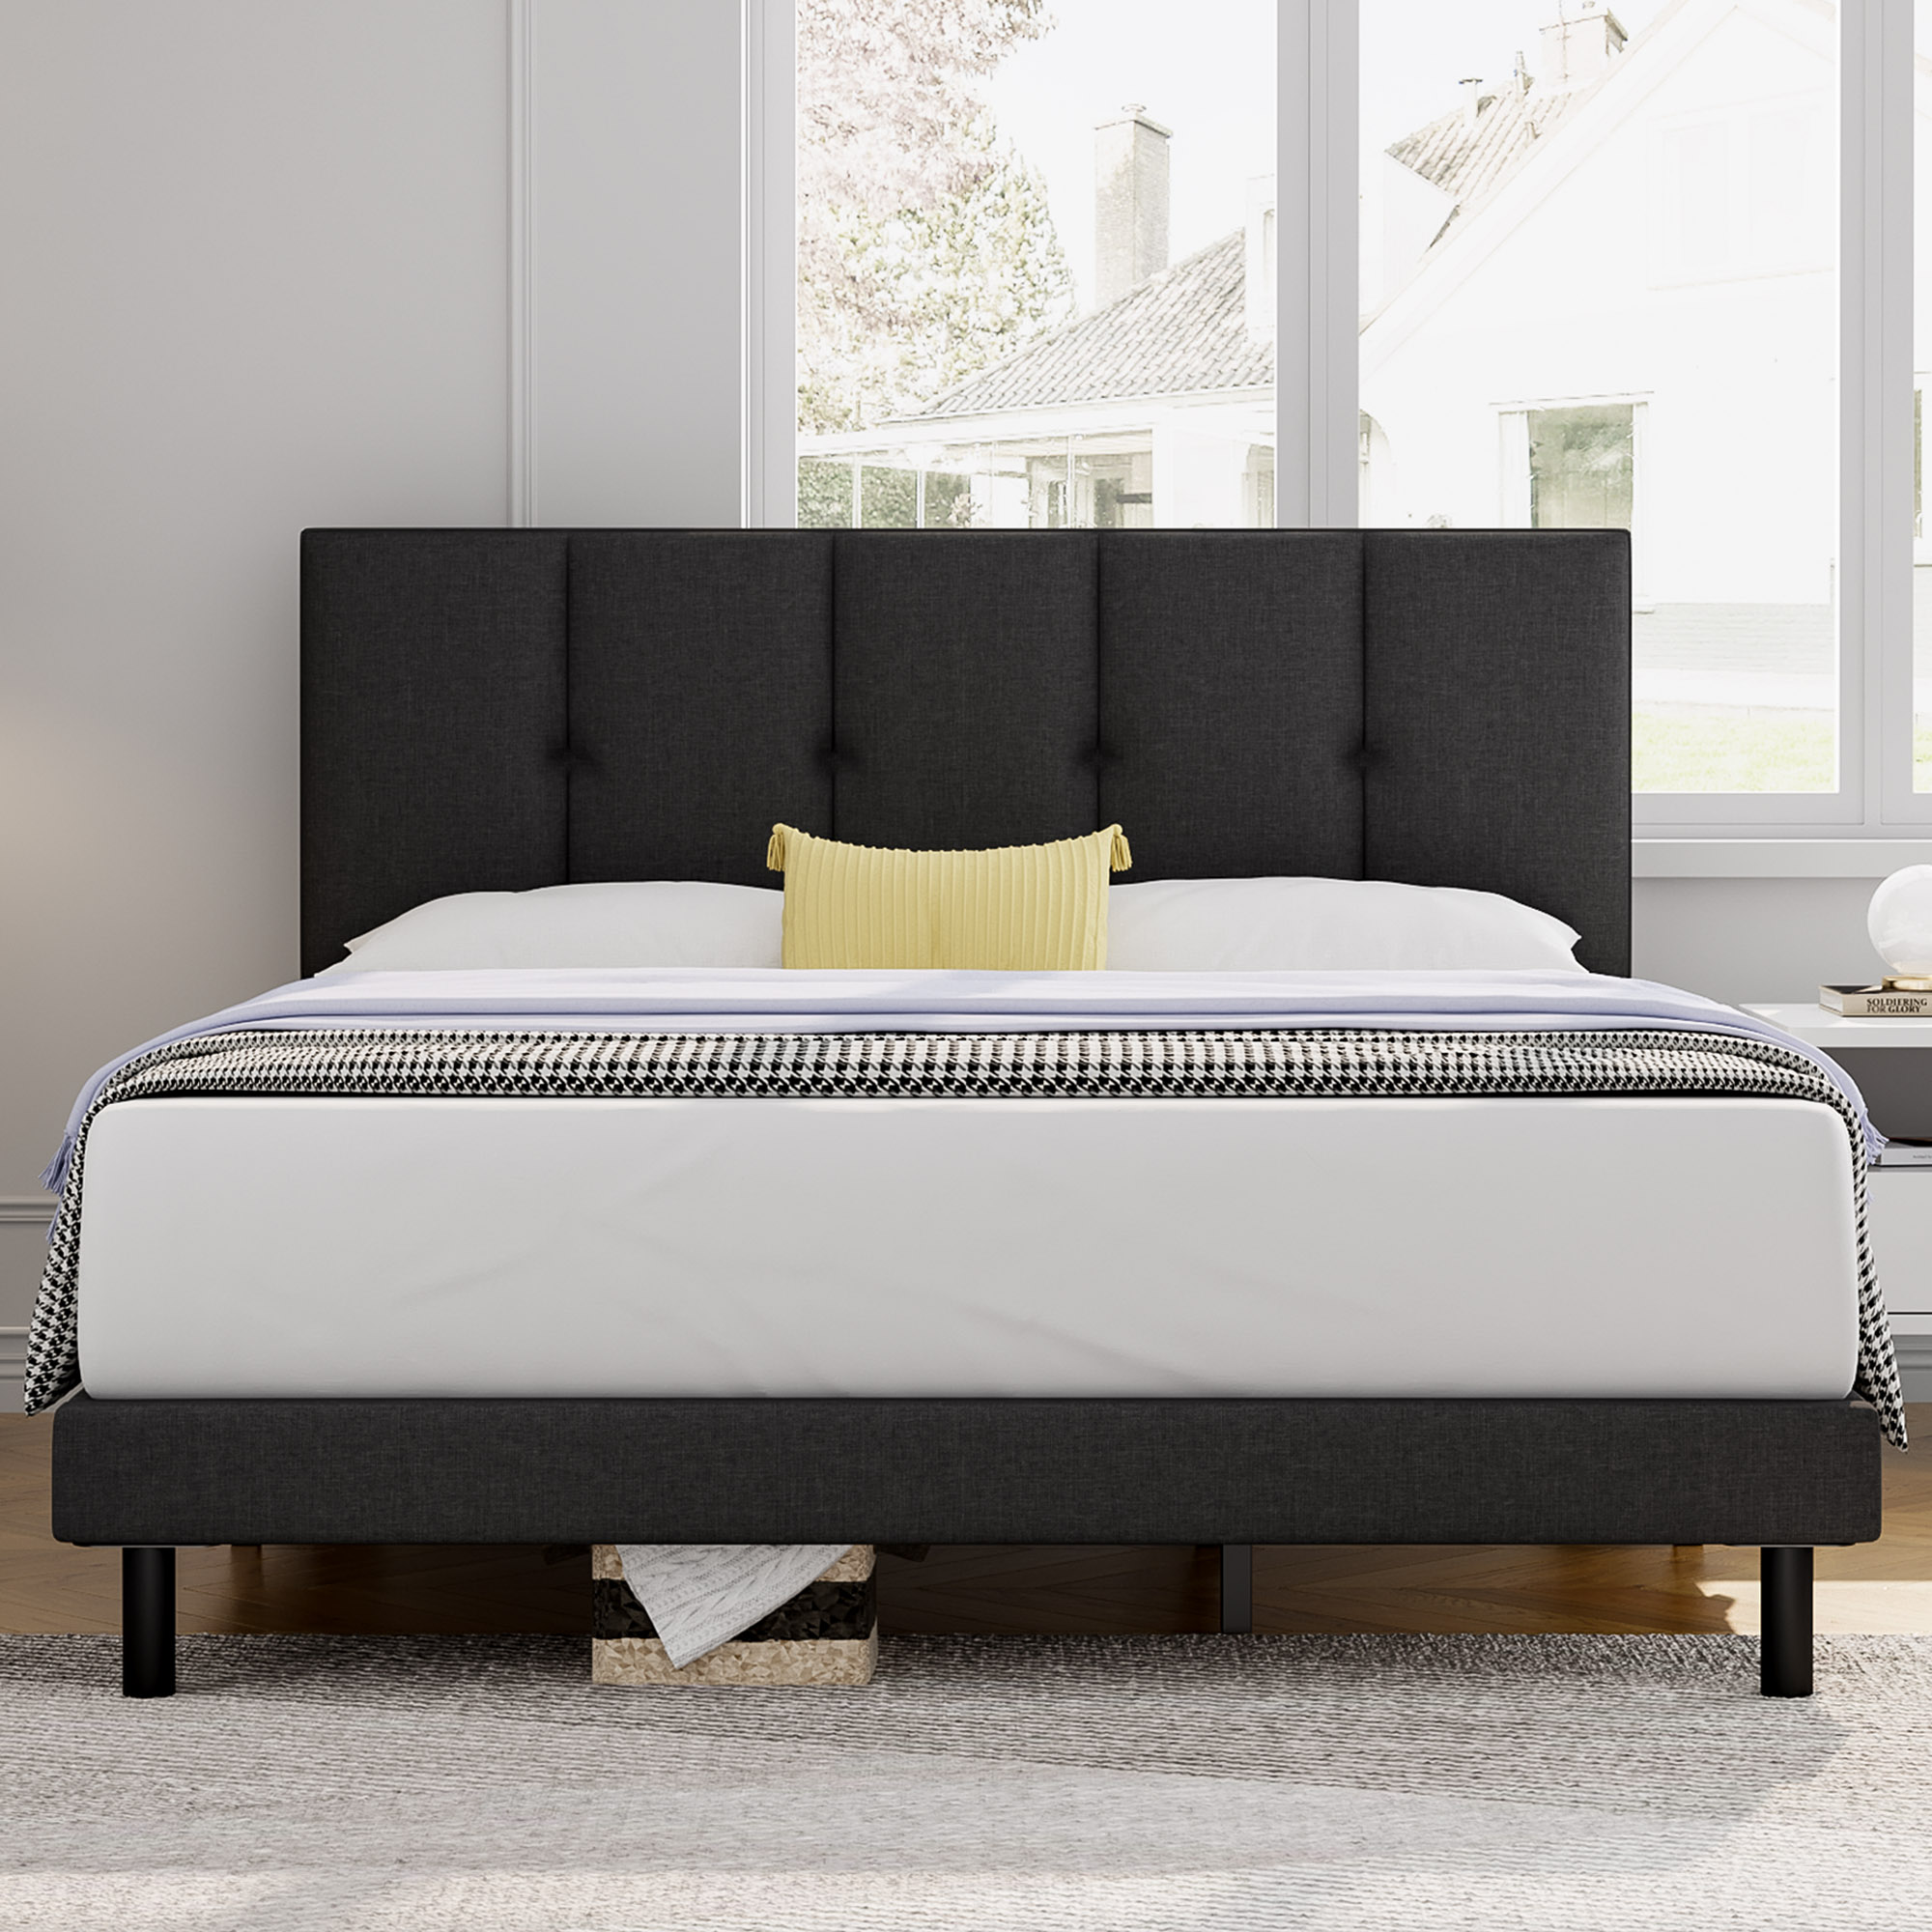 Queen bed, HAIIDE Queen Size Platform Bed Frame with Fabric Upholstered Headboard, No Box Spring Needed, Dark Grey - image 1 of 7